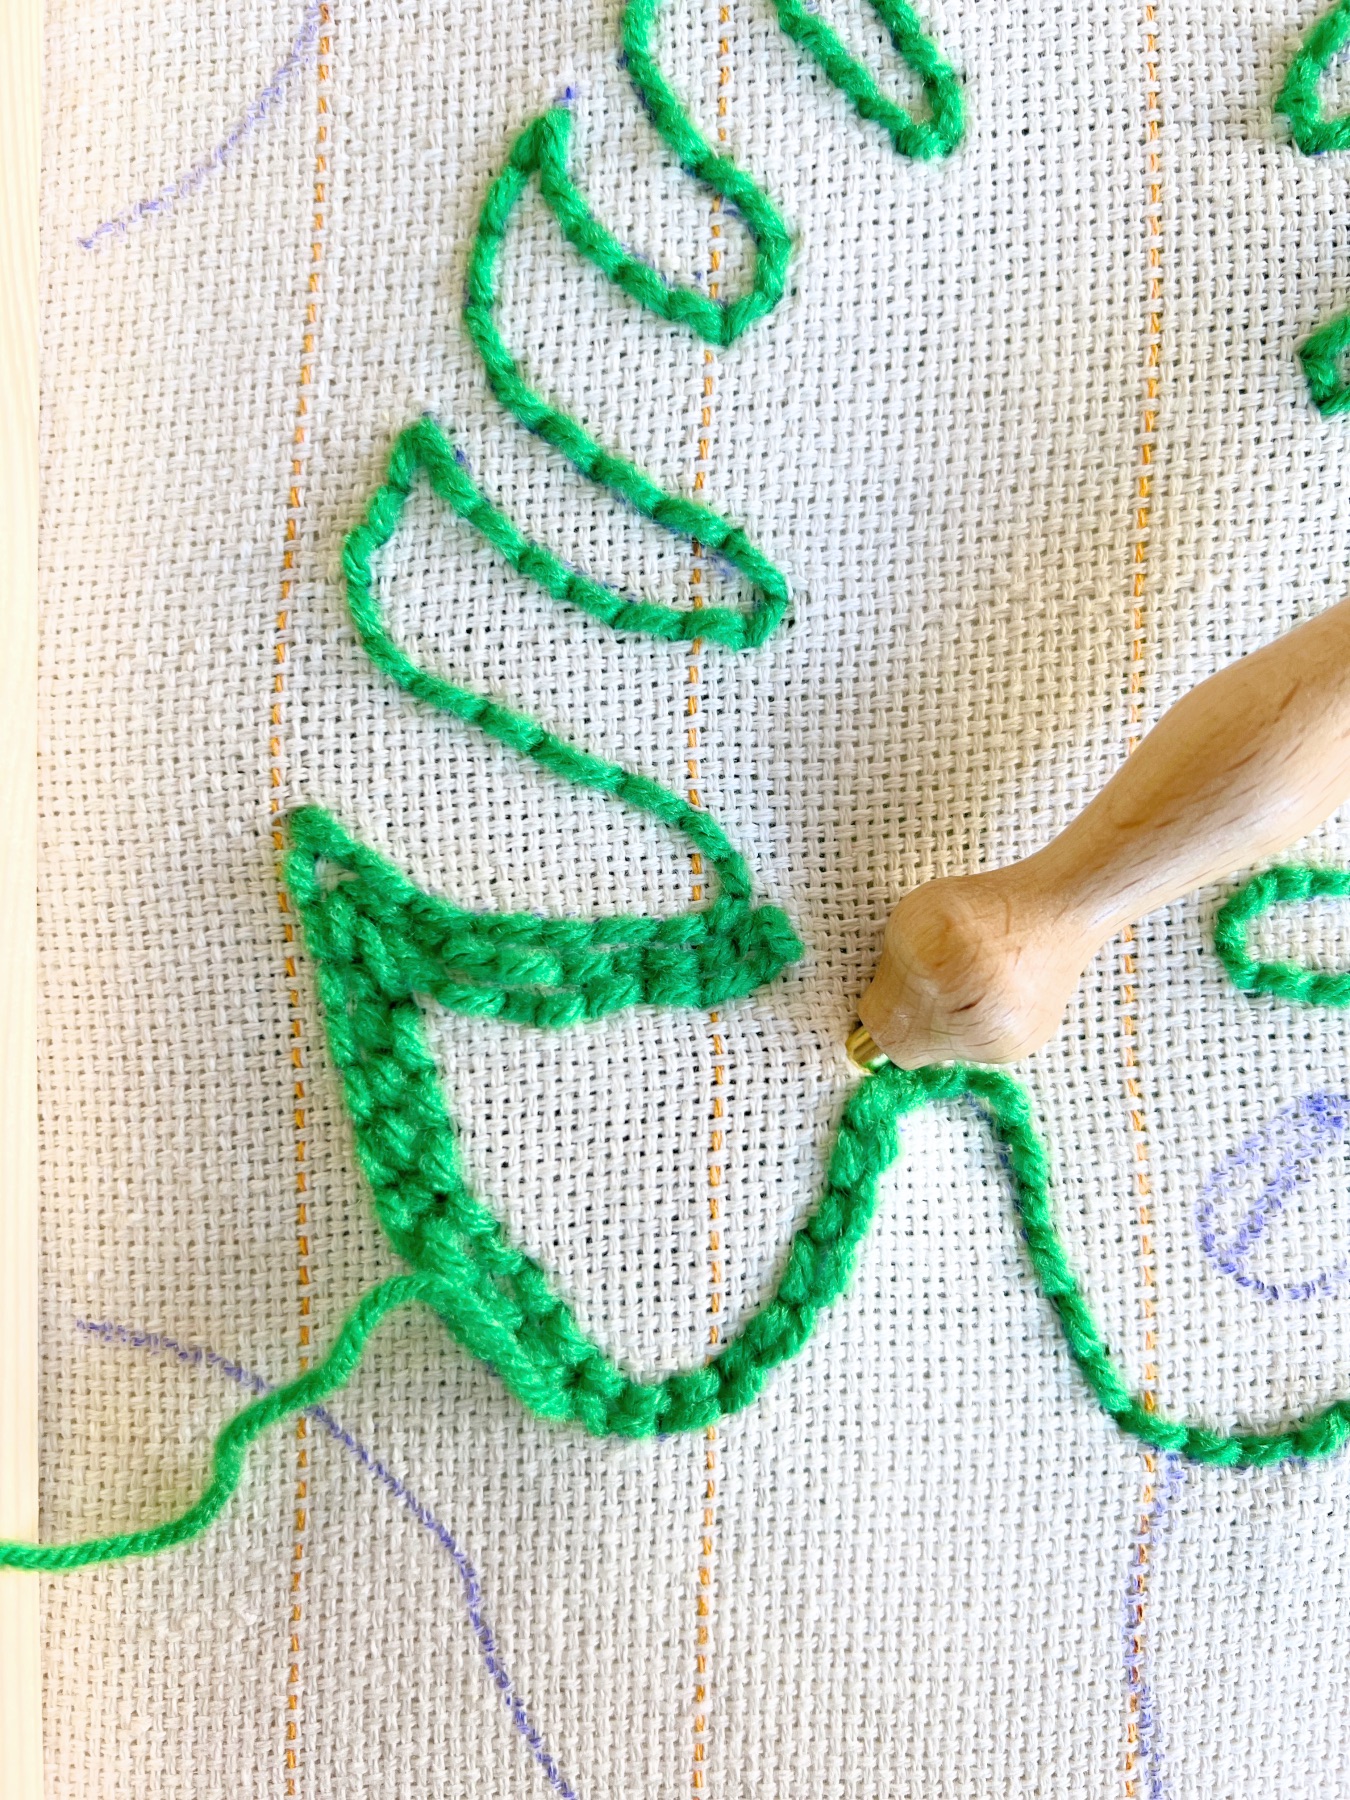 make additional rows of stitches